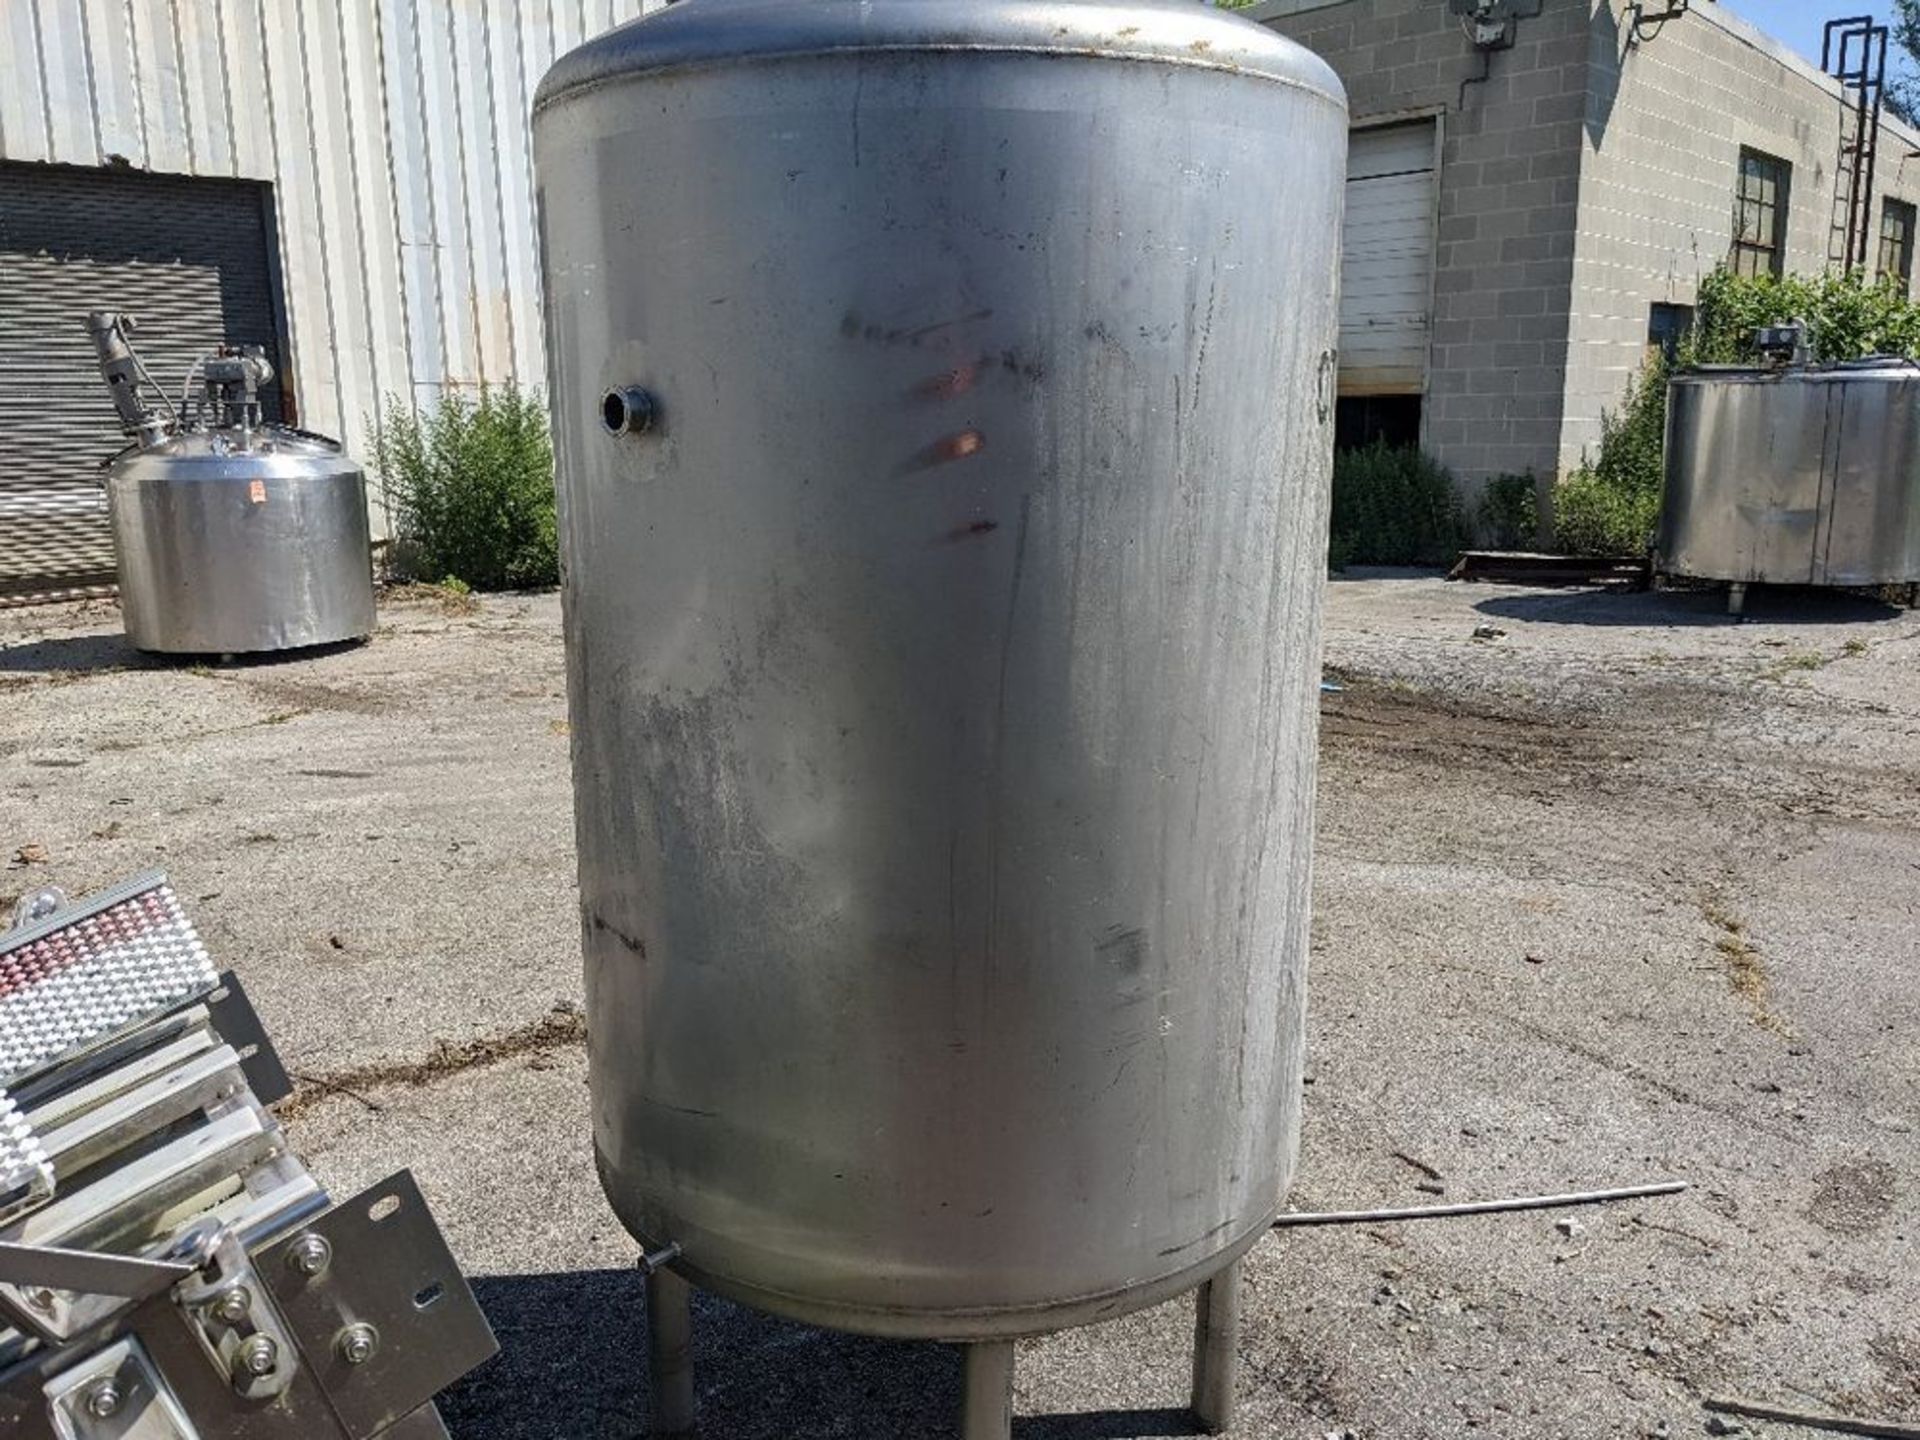 Qty (1) Vertical Single Wall Stainless Steel Pressure Tank 250 Gallon - 250 gallon capacity - - Image 2 of 4